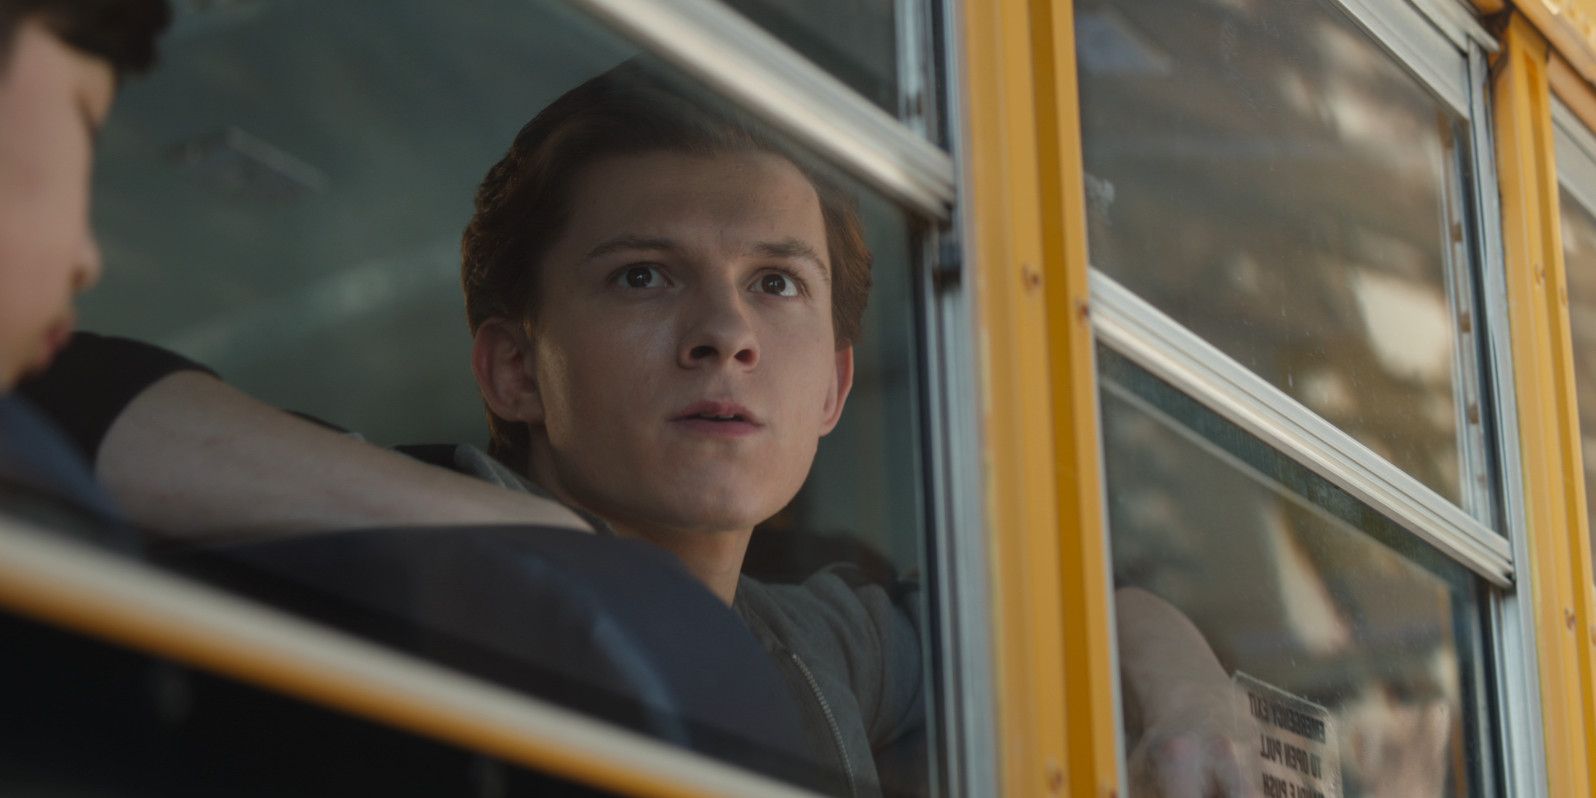 Peter Parker on a school bus noticing an alien spacecraft in the distance off-screen.